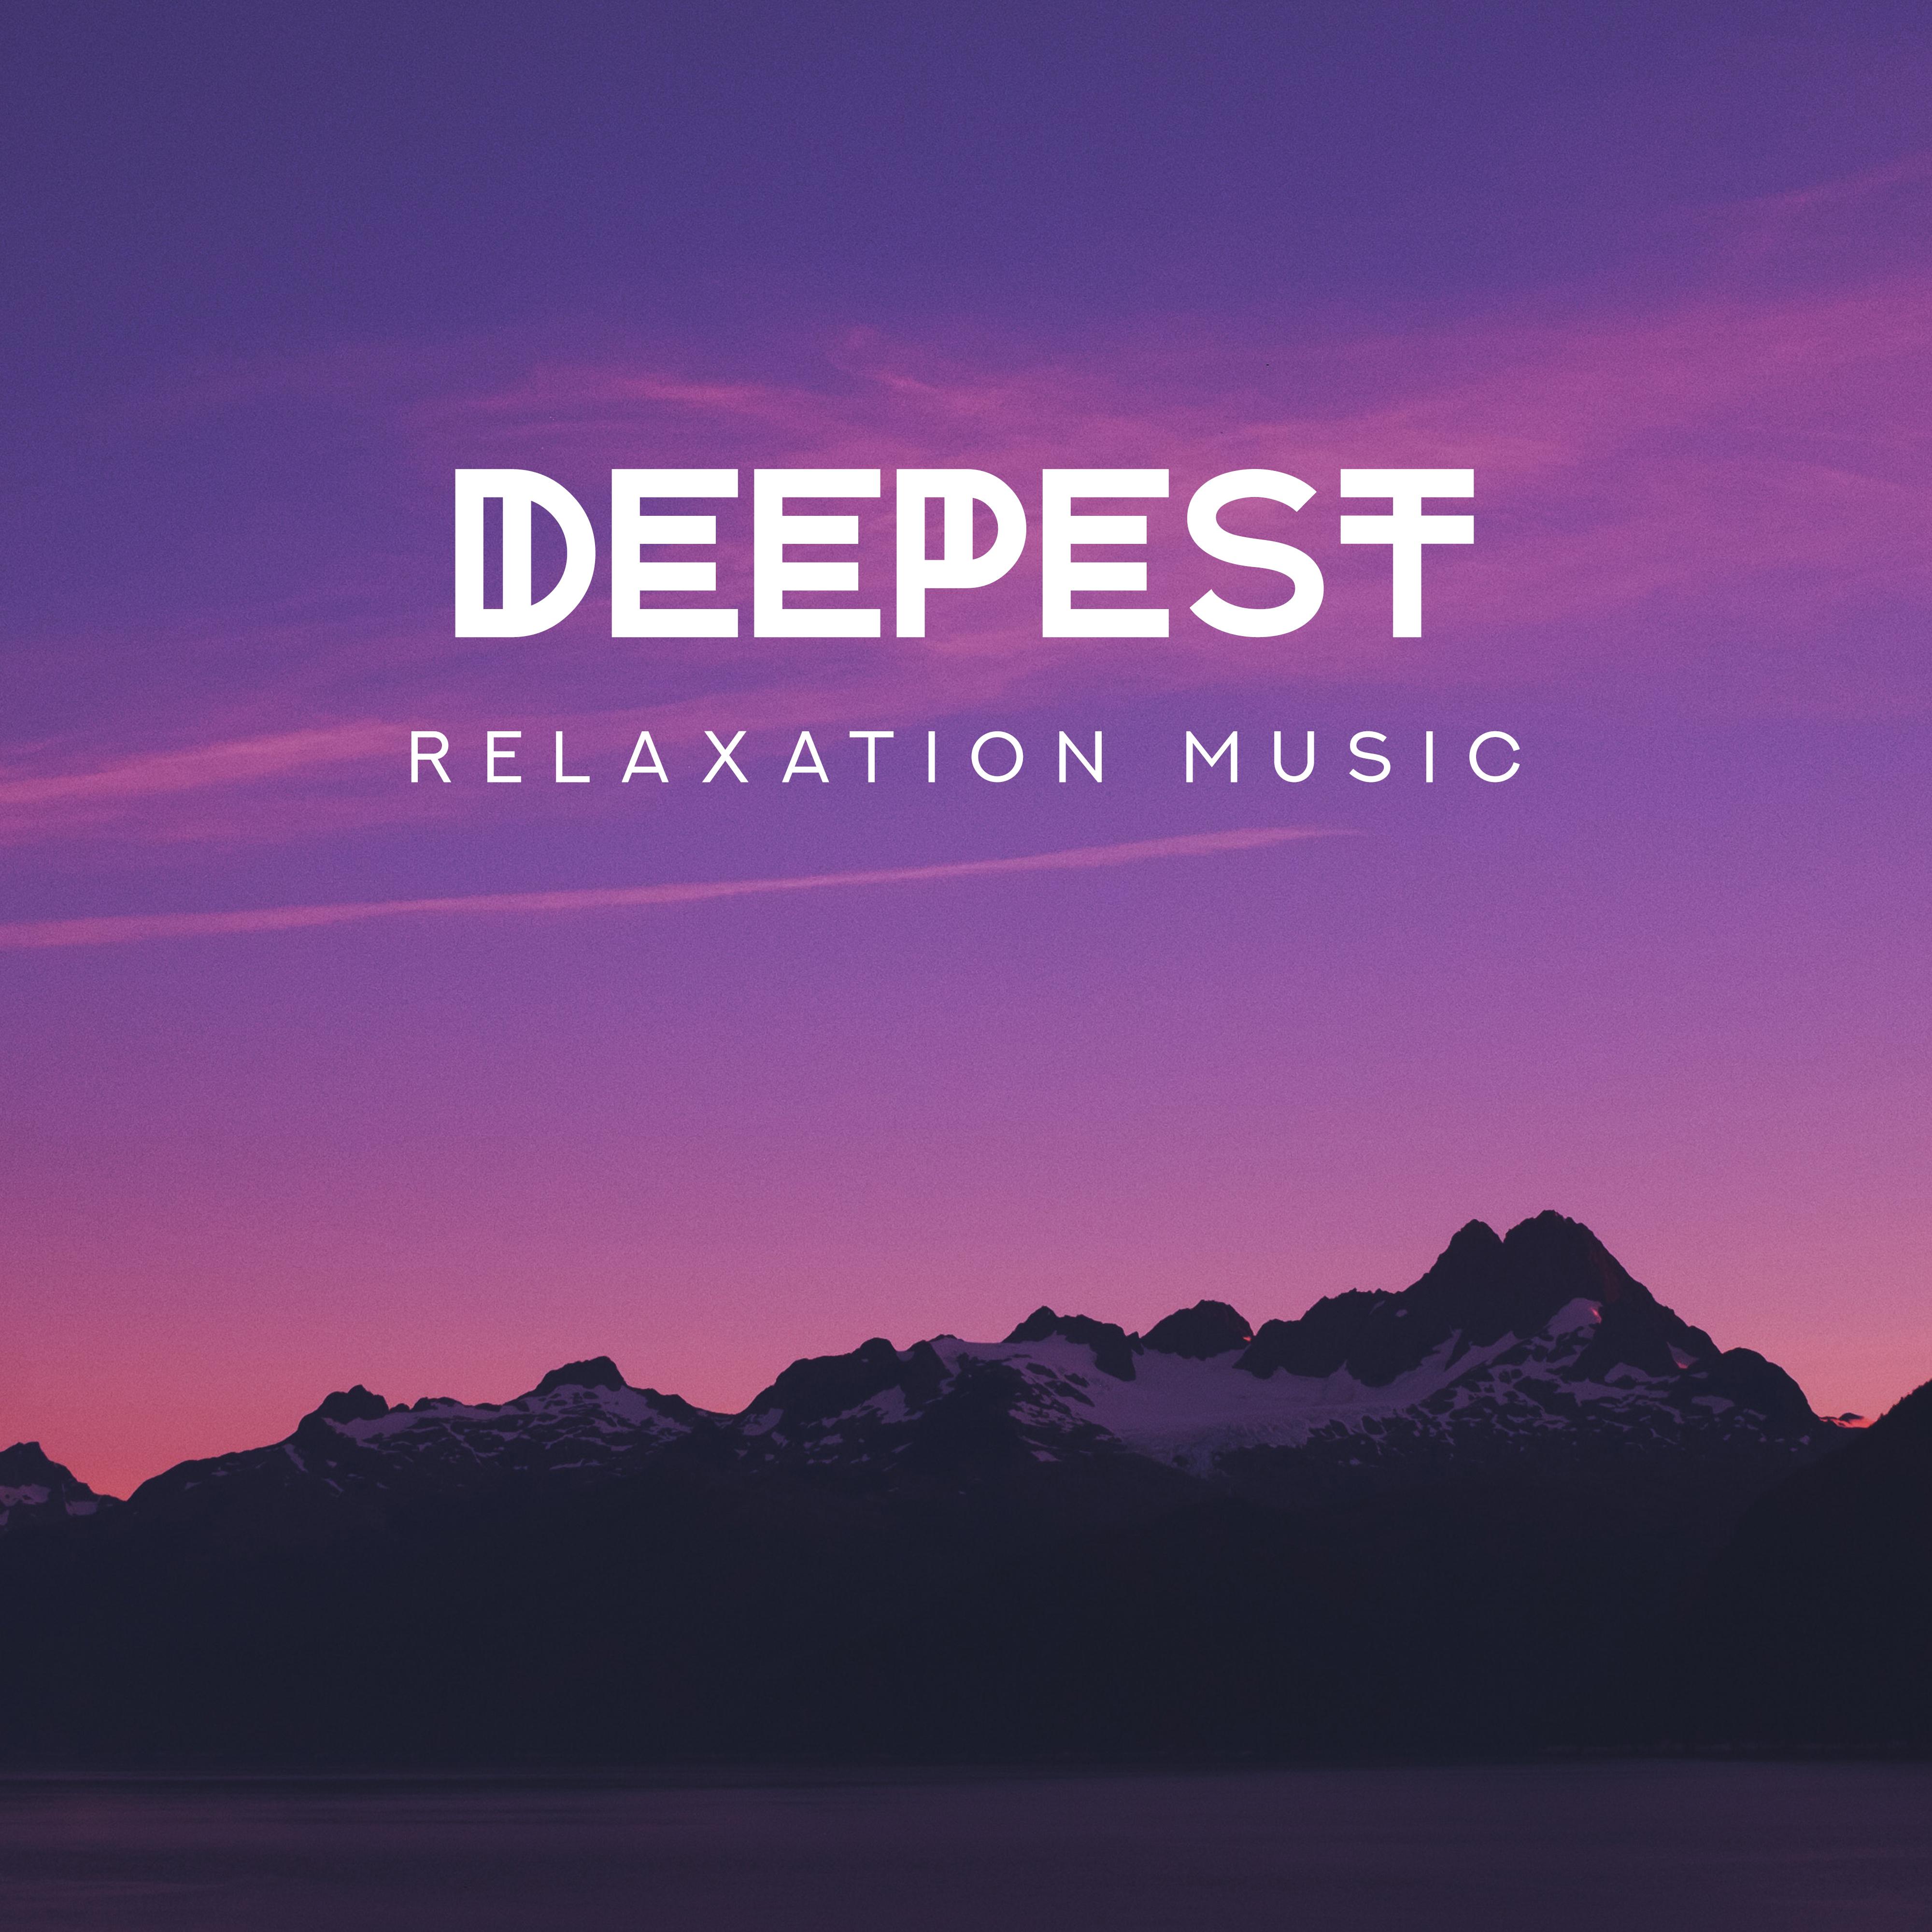 Deepest Relaxation Music: Sounds that' ll Make You Relax, Release From Stress and Tension, Calm Down and Completely Rest